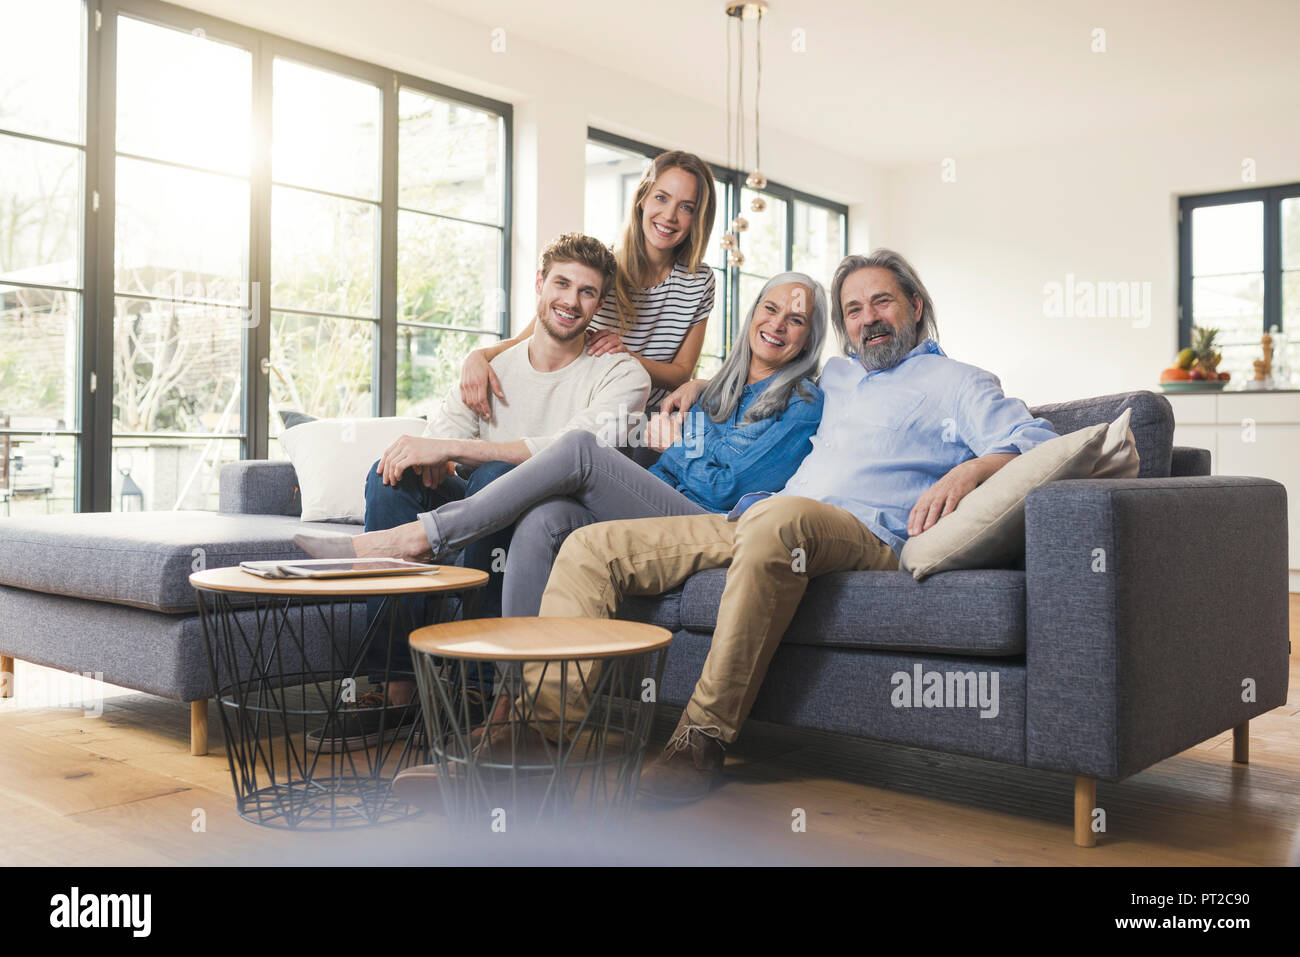 Senior couple with family sitting on couch Stock Photo